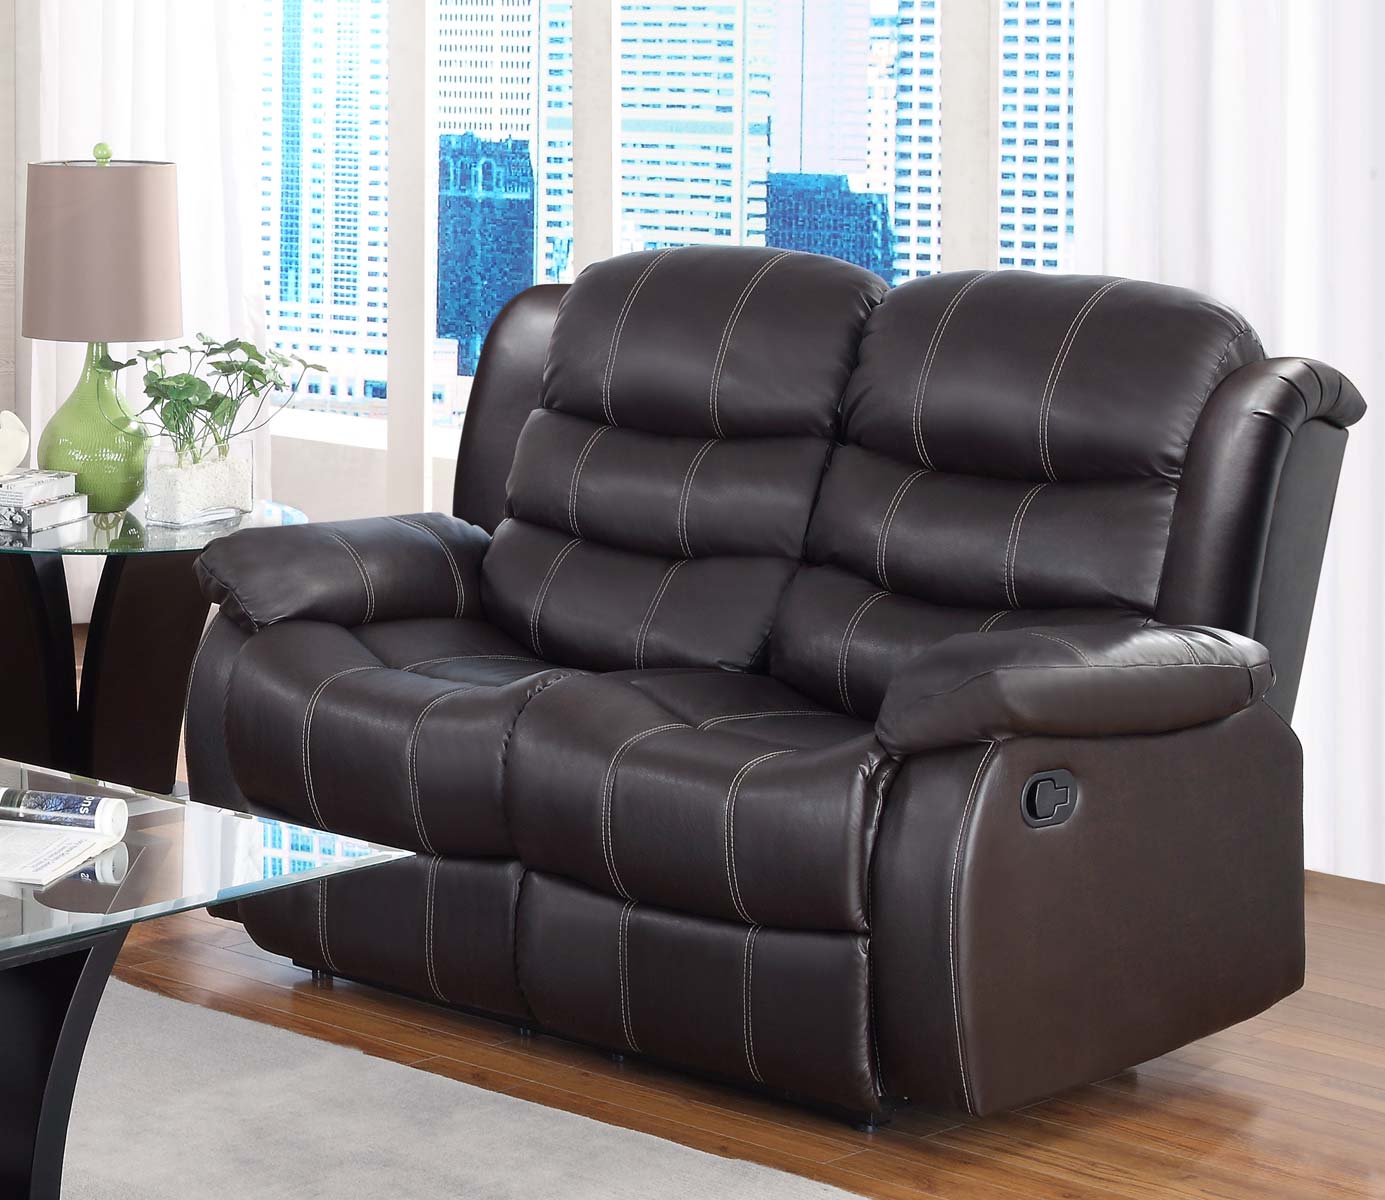 Homelegance Smithee Love Seat Dual Recliner - Dark Brown - Bonded Leather Match